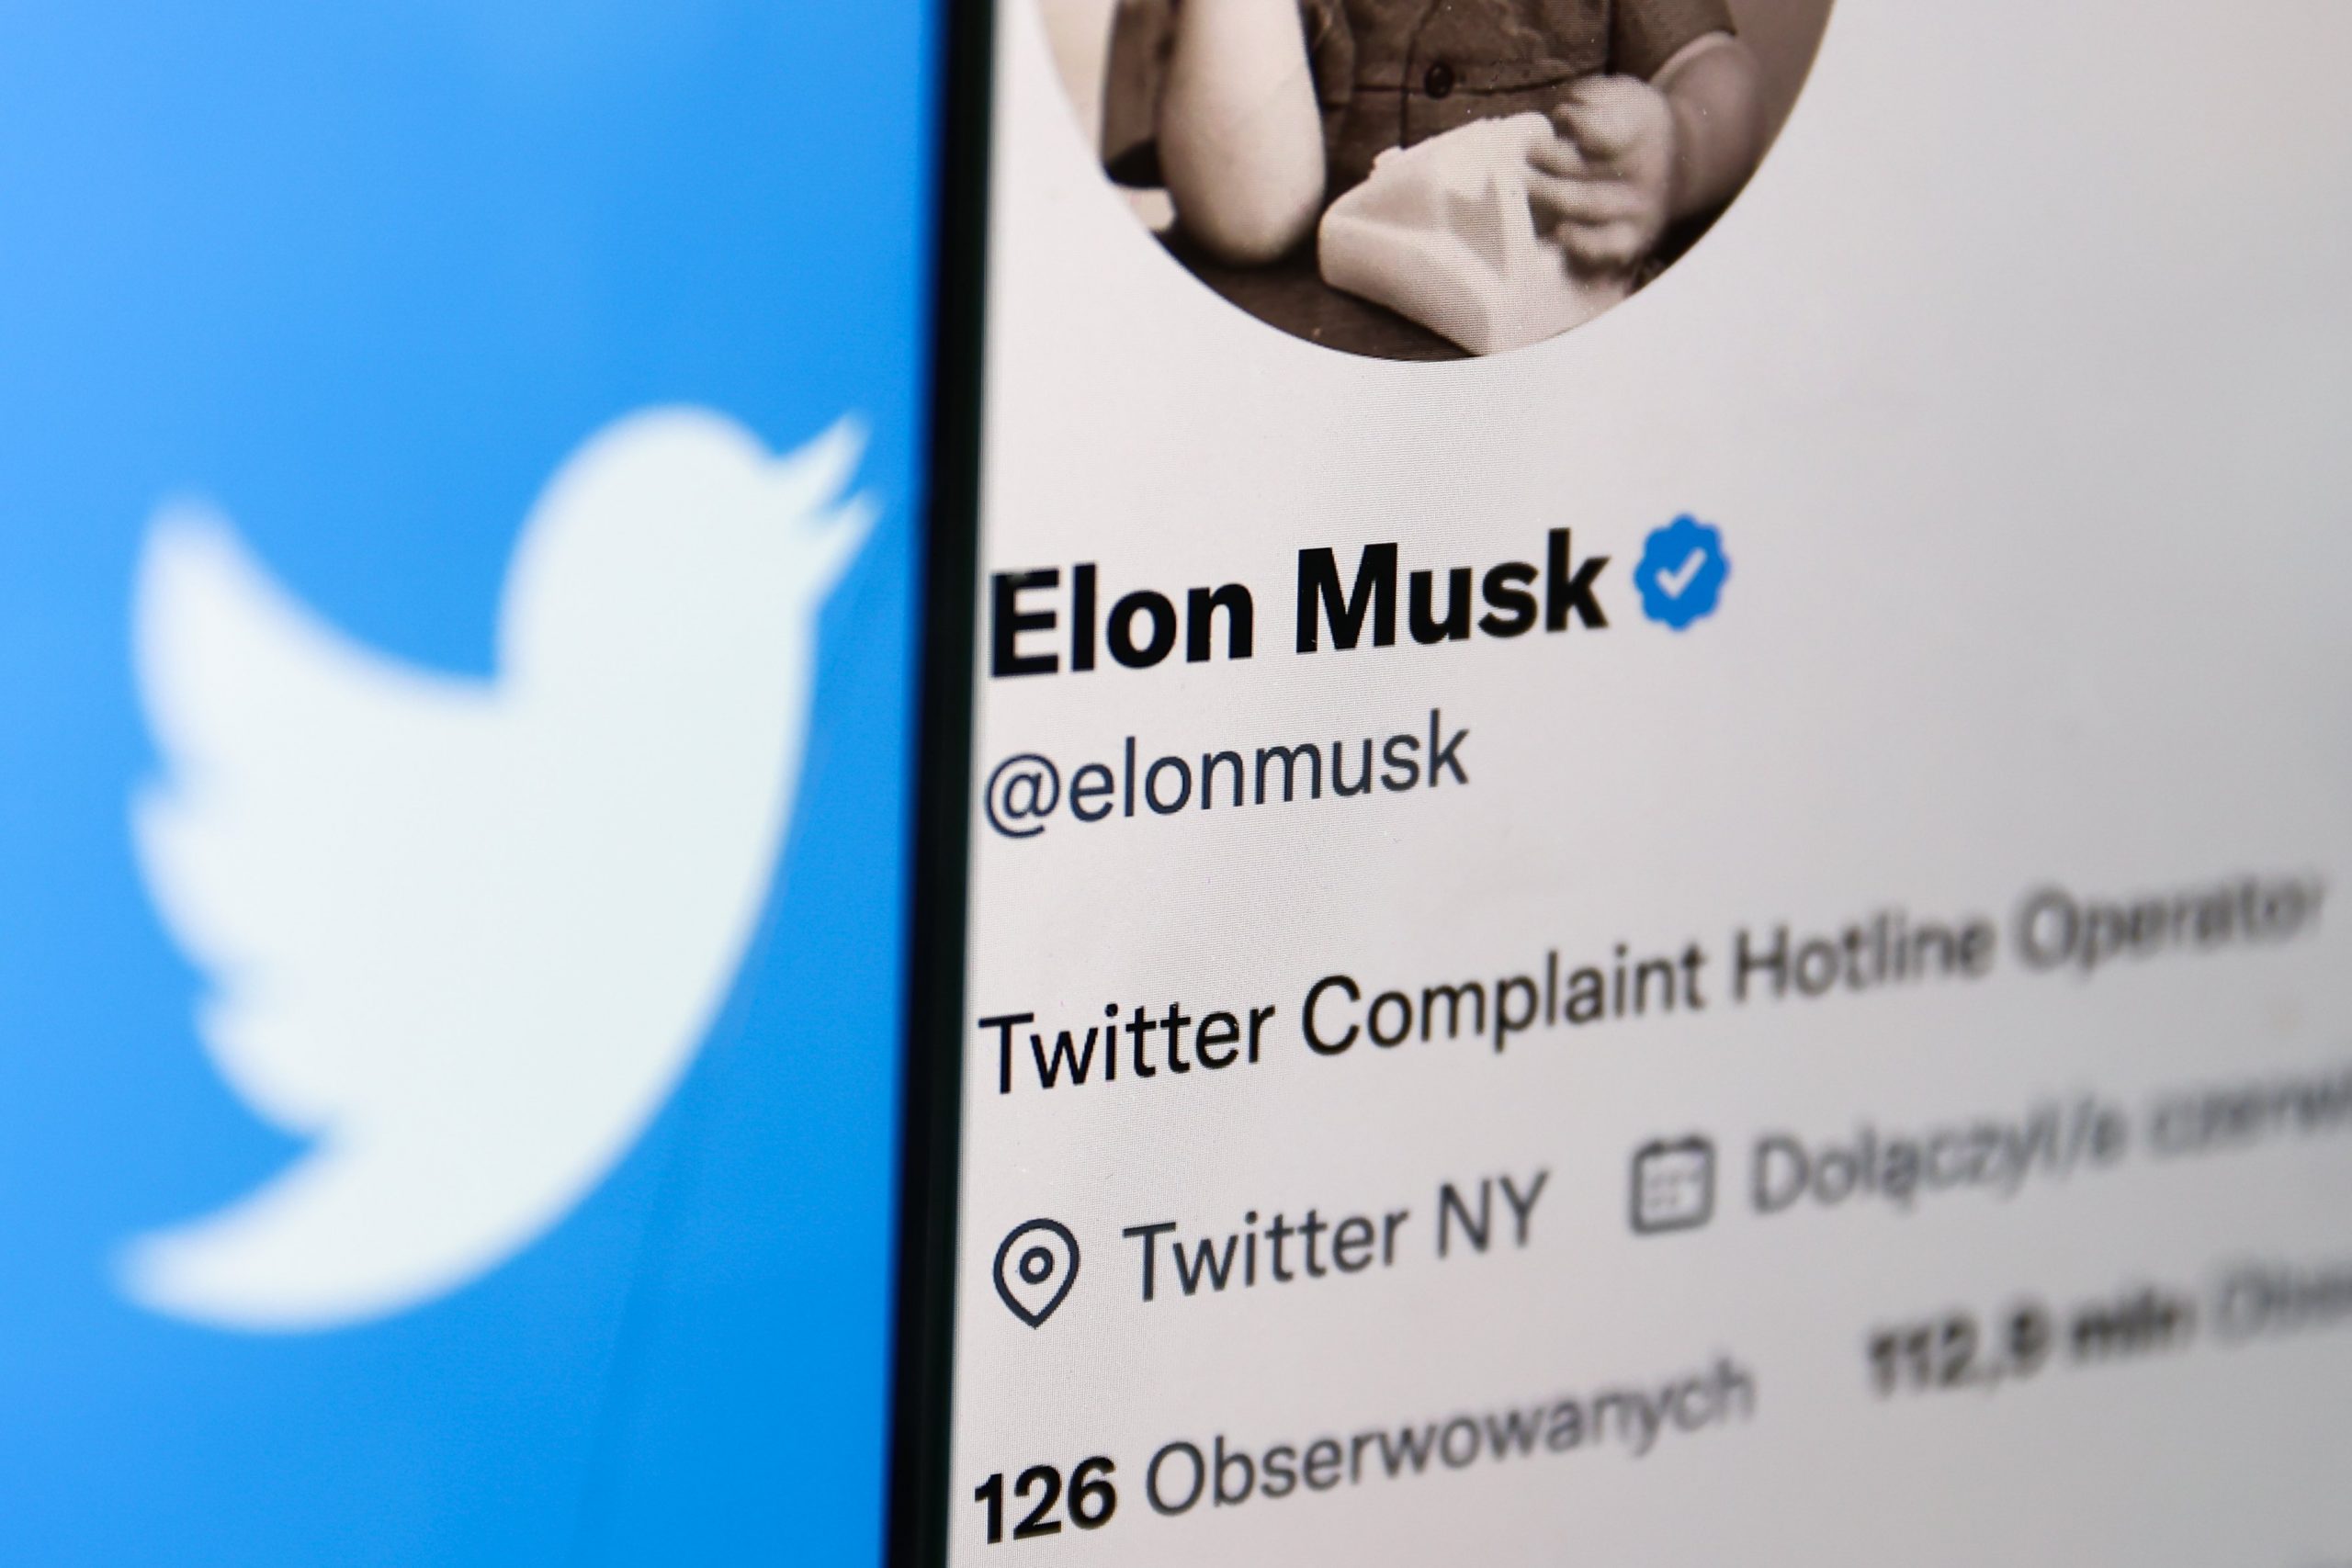 Elon Musk has owned Twitter for less than a week. Conservatives are already canceling him.